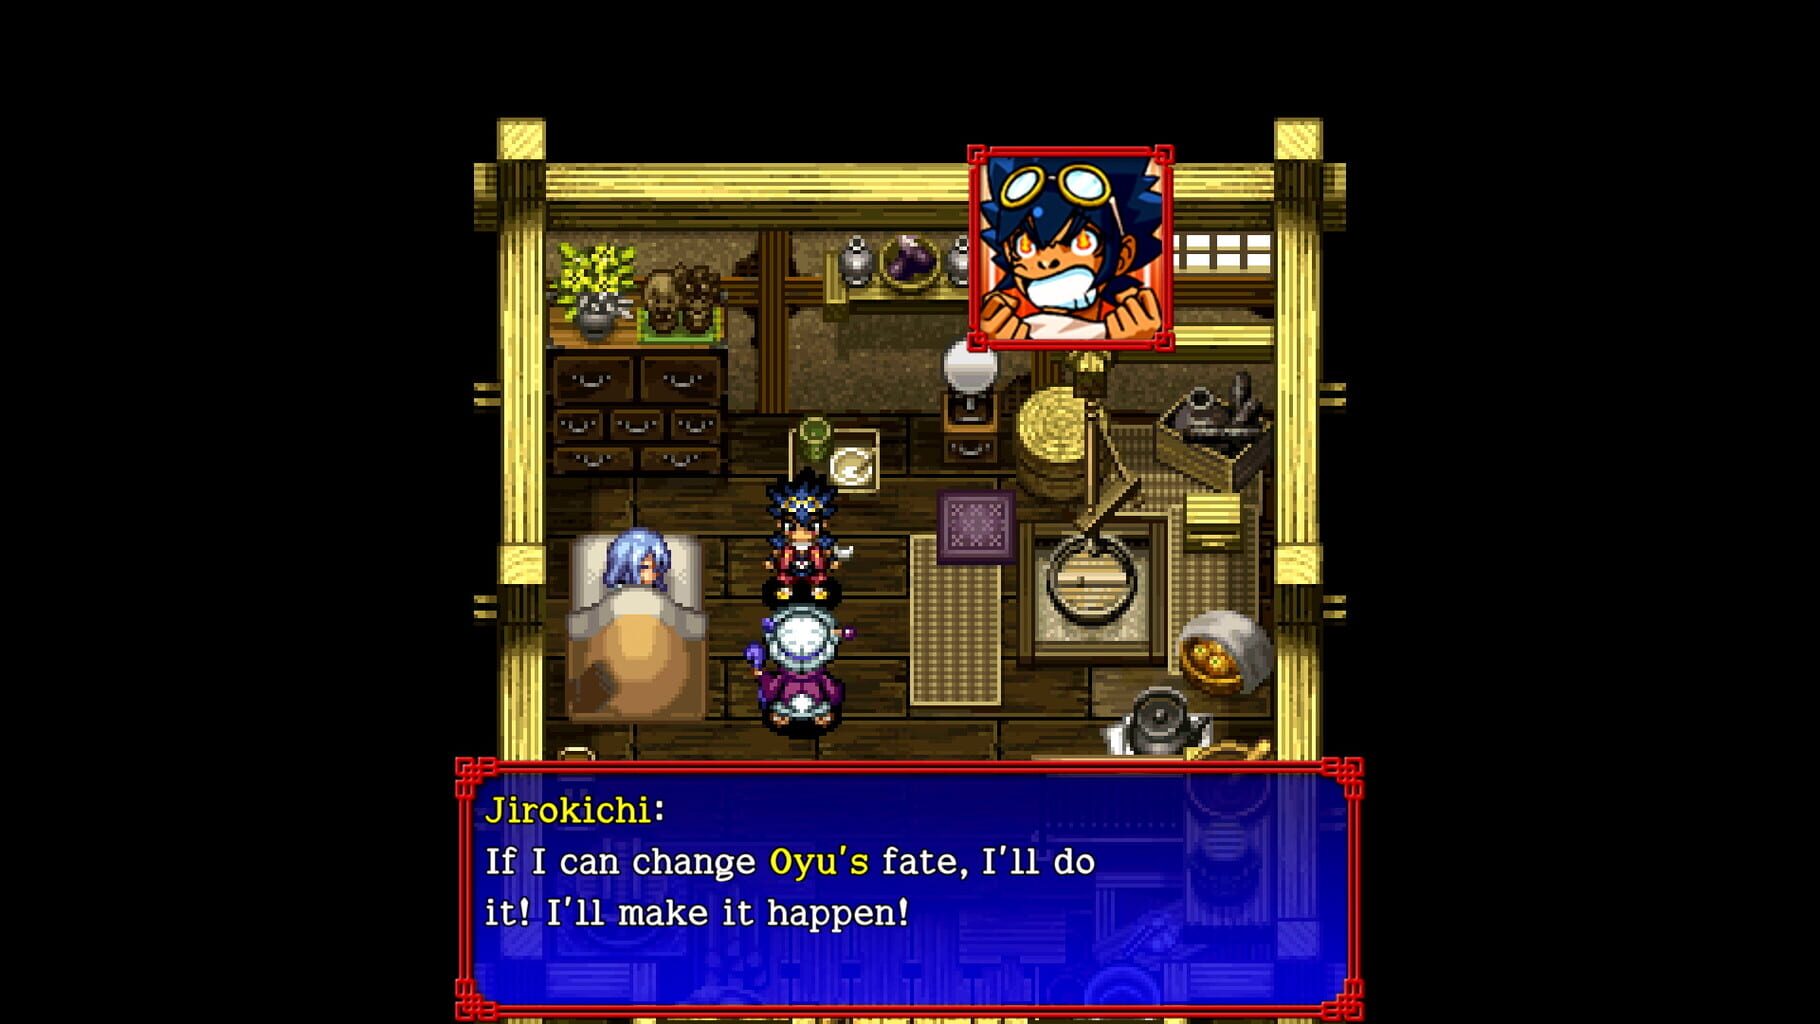 Shiren the Wanderer: The Tower of Fortune and the Dice of Fate screenshot